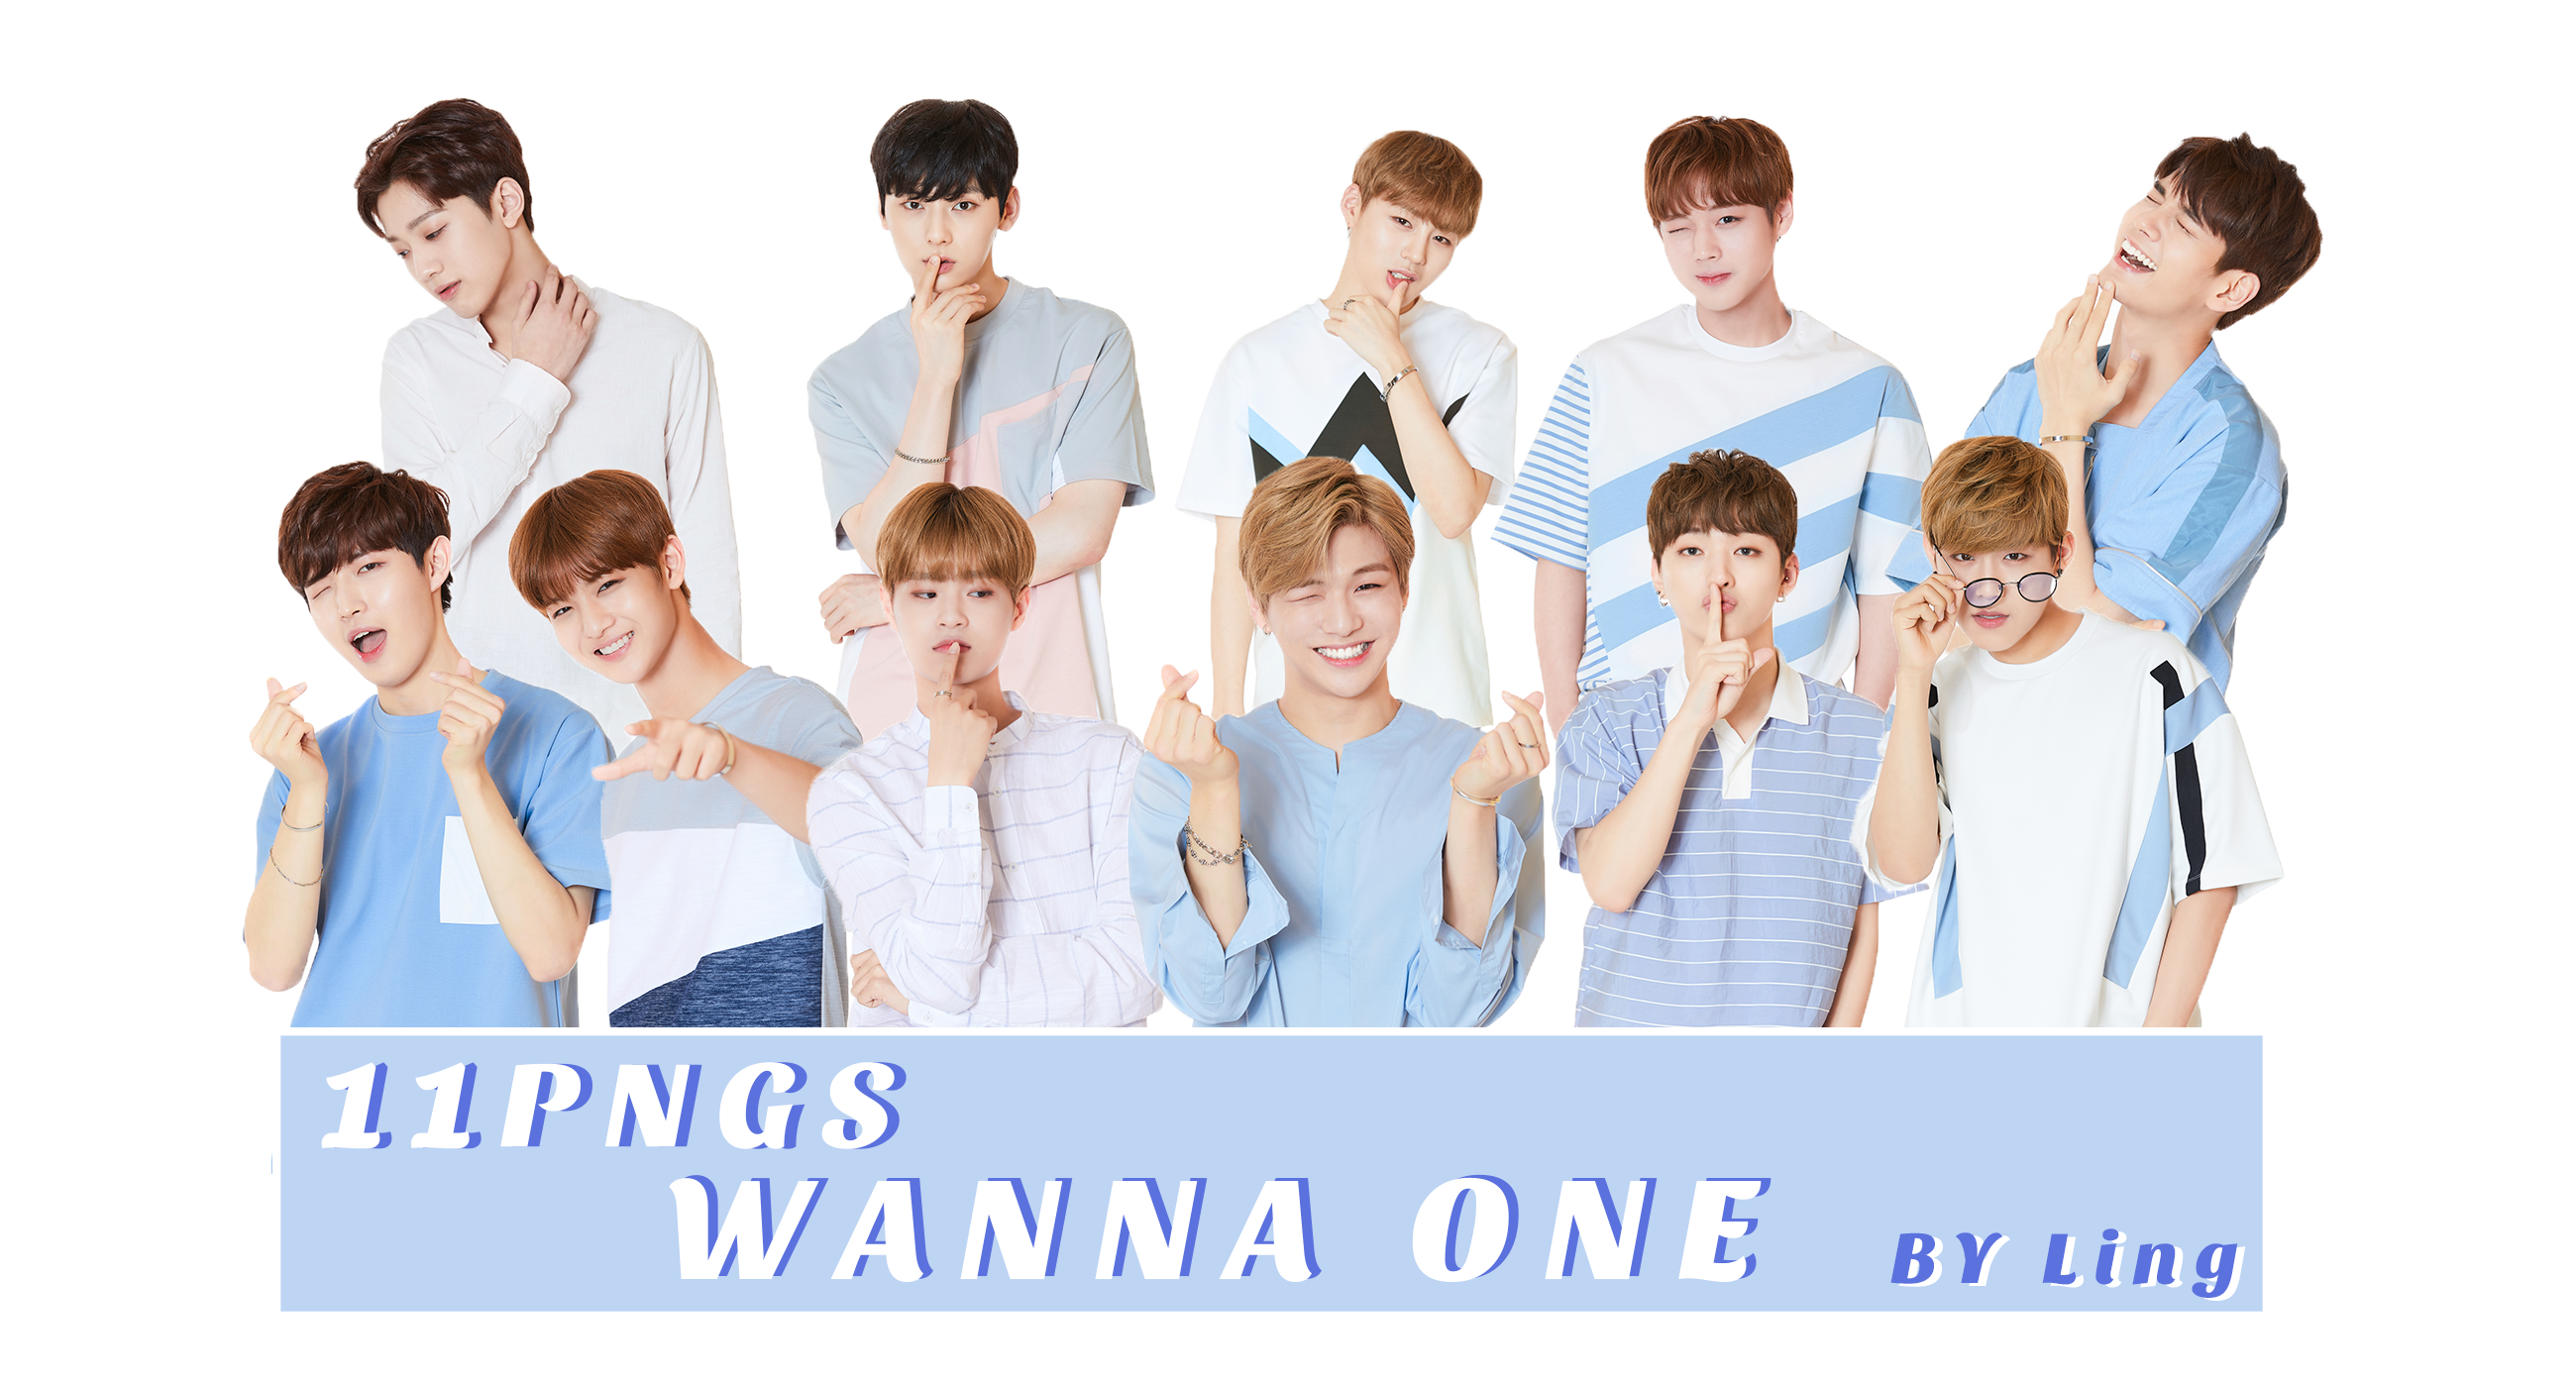 Wanna ONE Band PNG Transparent Image